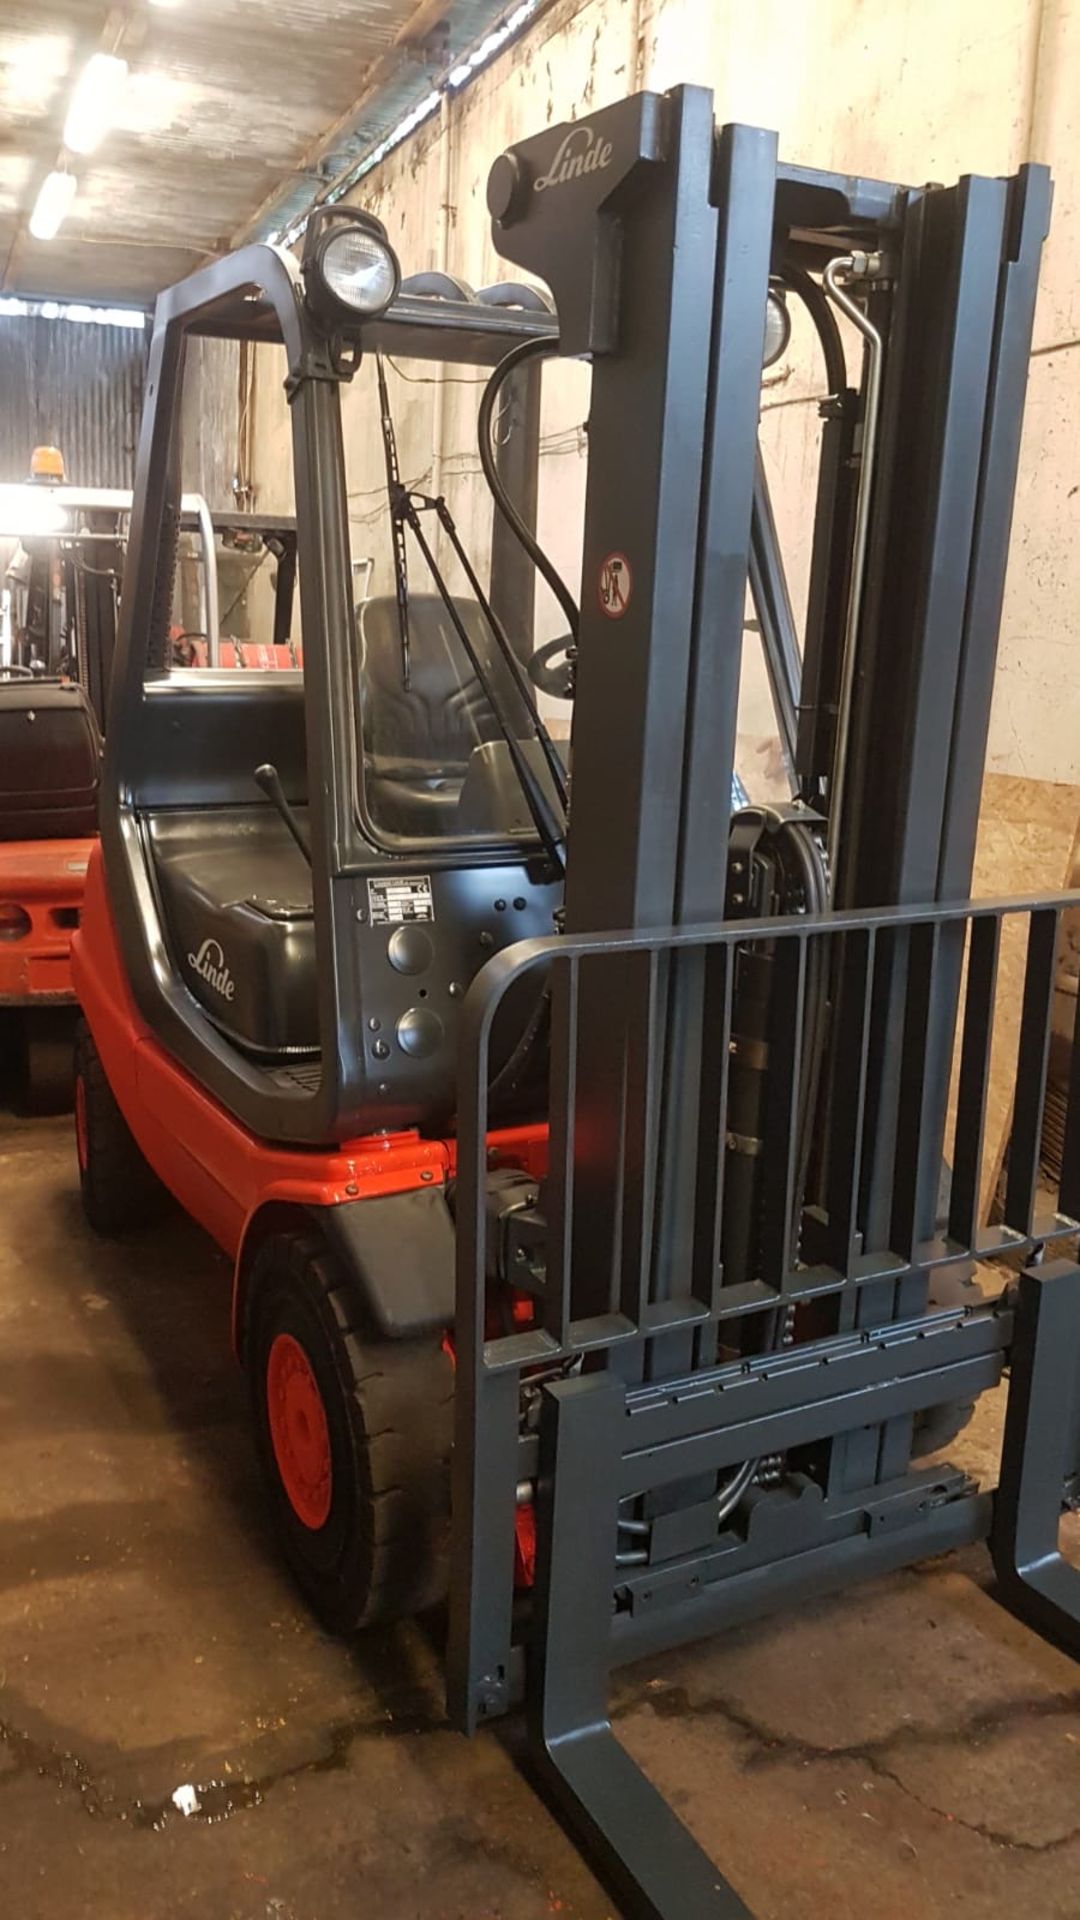 LINDE H25D DIESEL FORKLIFT TRUCK 2.5 TONNE RATED, CONTAINER SPEC 3 STAGE MAST WITH SIDESHIFT VENDORS - Image 2 of 3